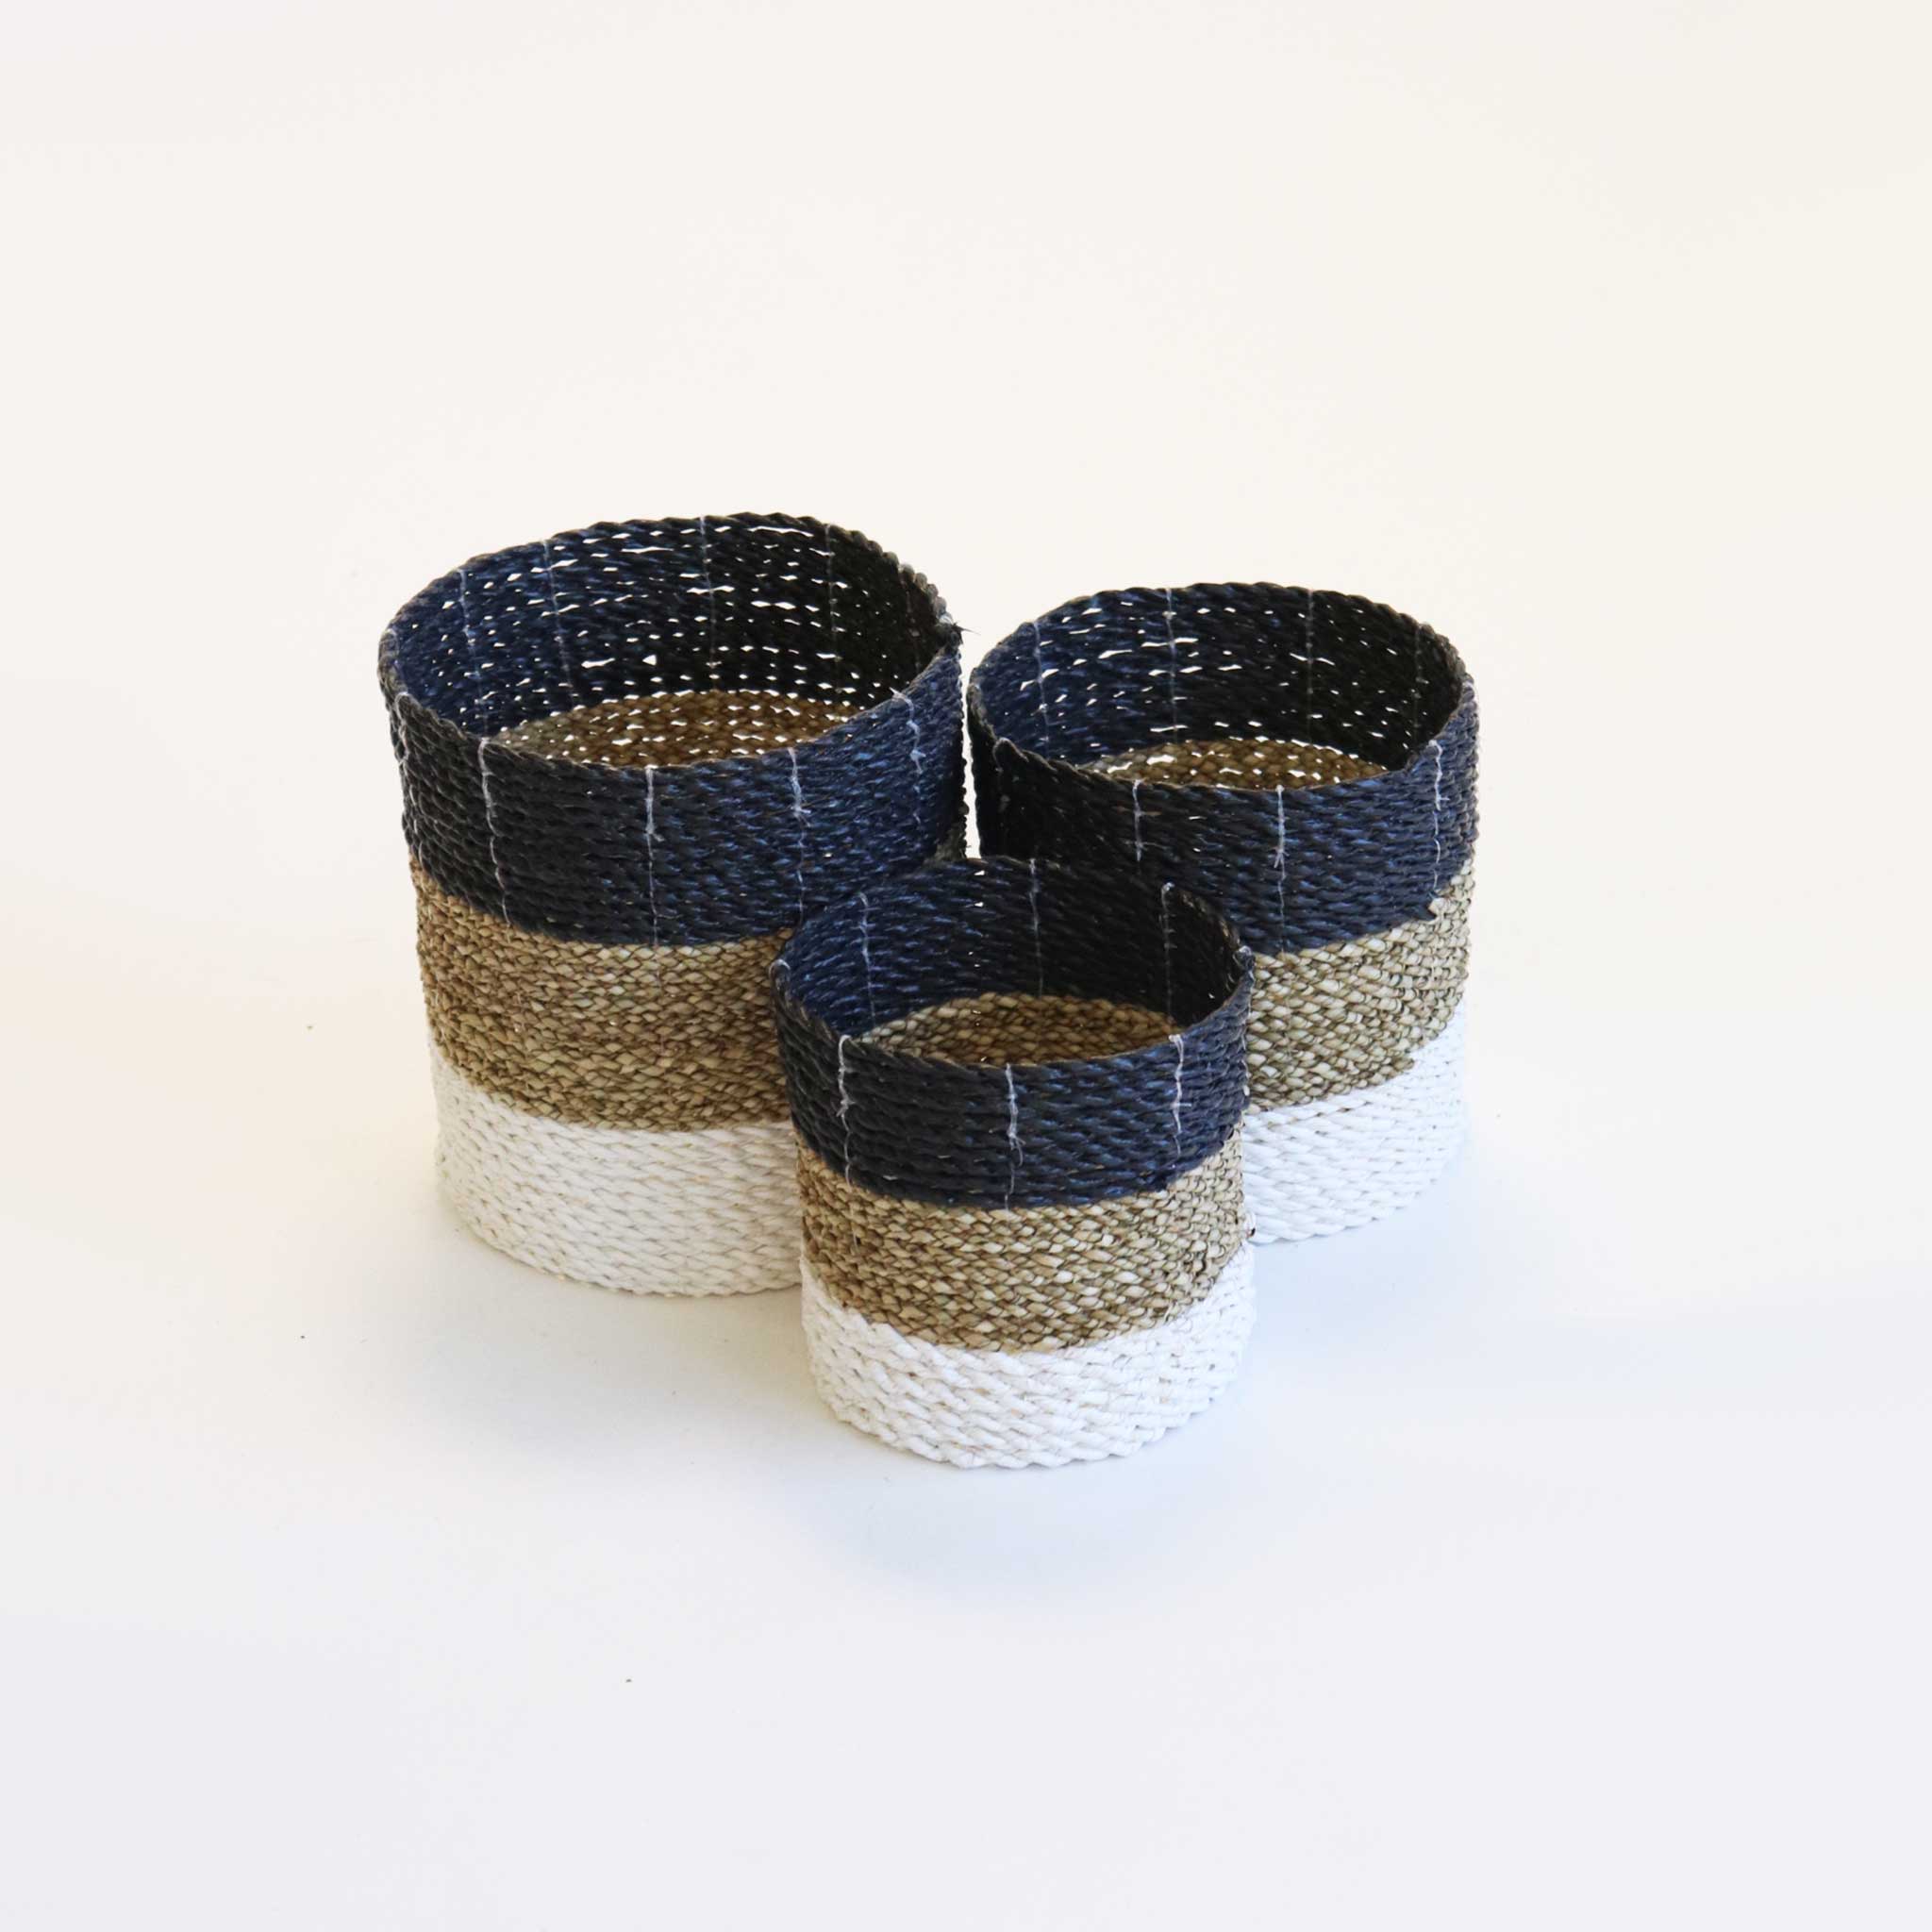 Small Black, Natural and White Baskets